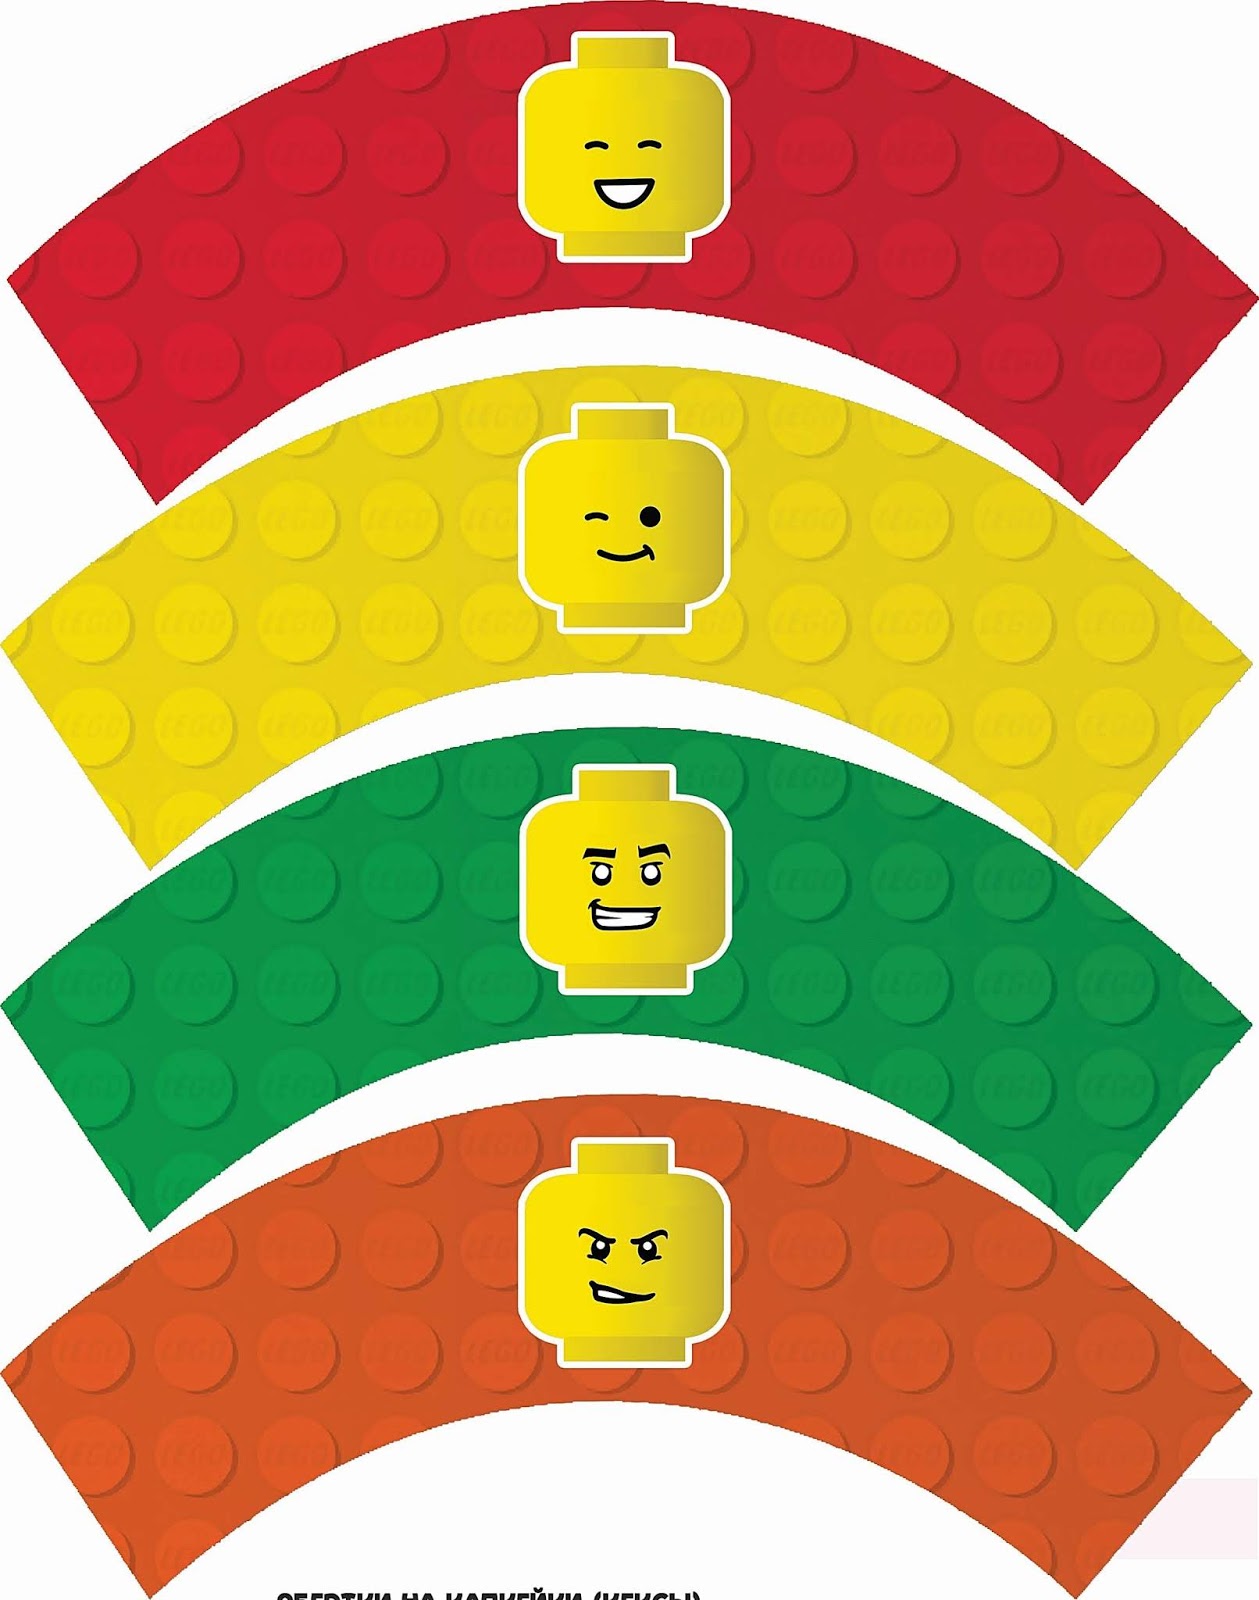 Lego Party Free Printable Cupcake Wrappers And Toppers Oh My Fiesta 